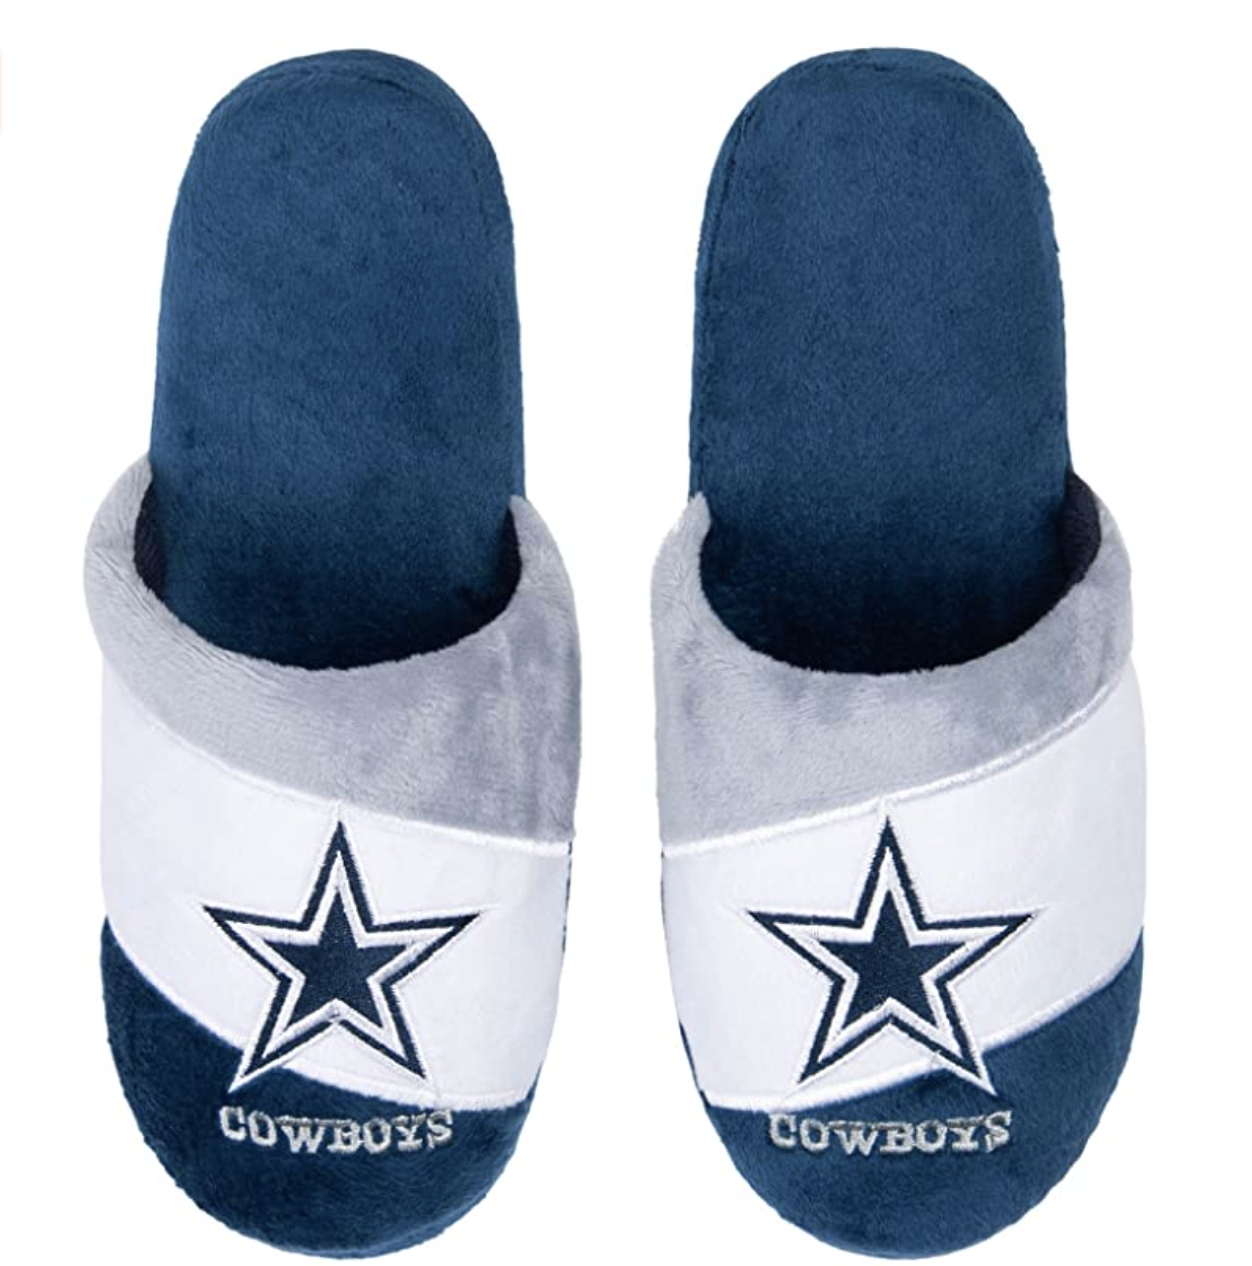 nfl house slippers gift idea